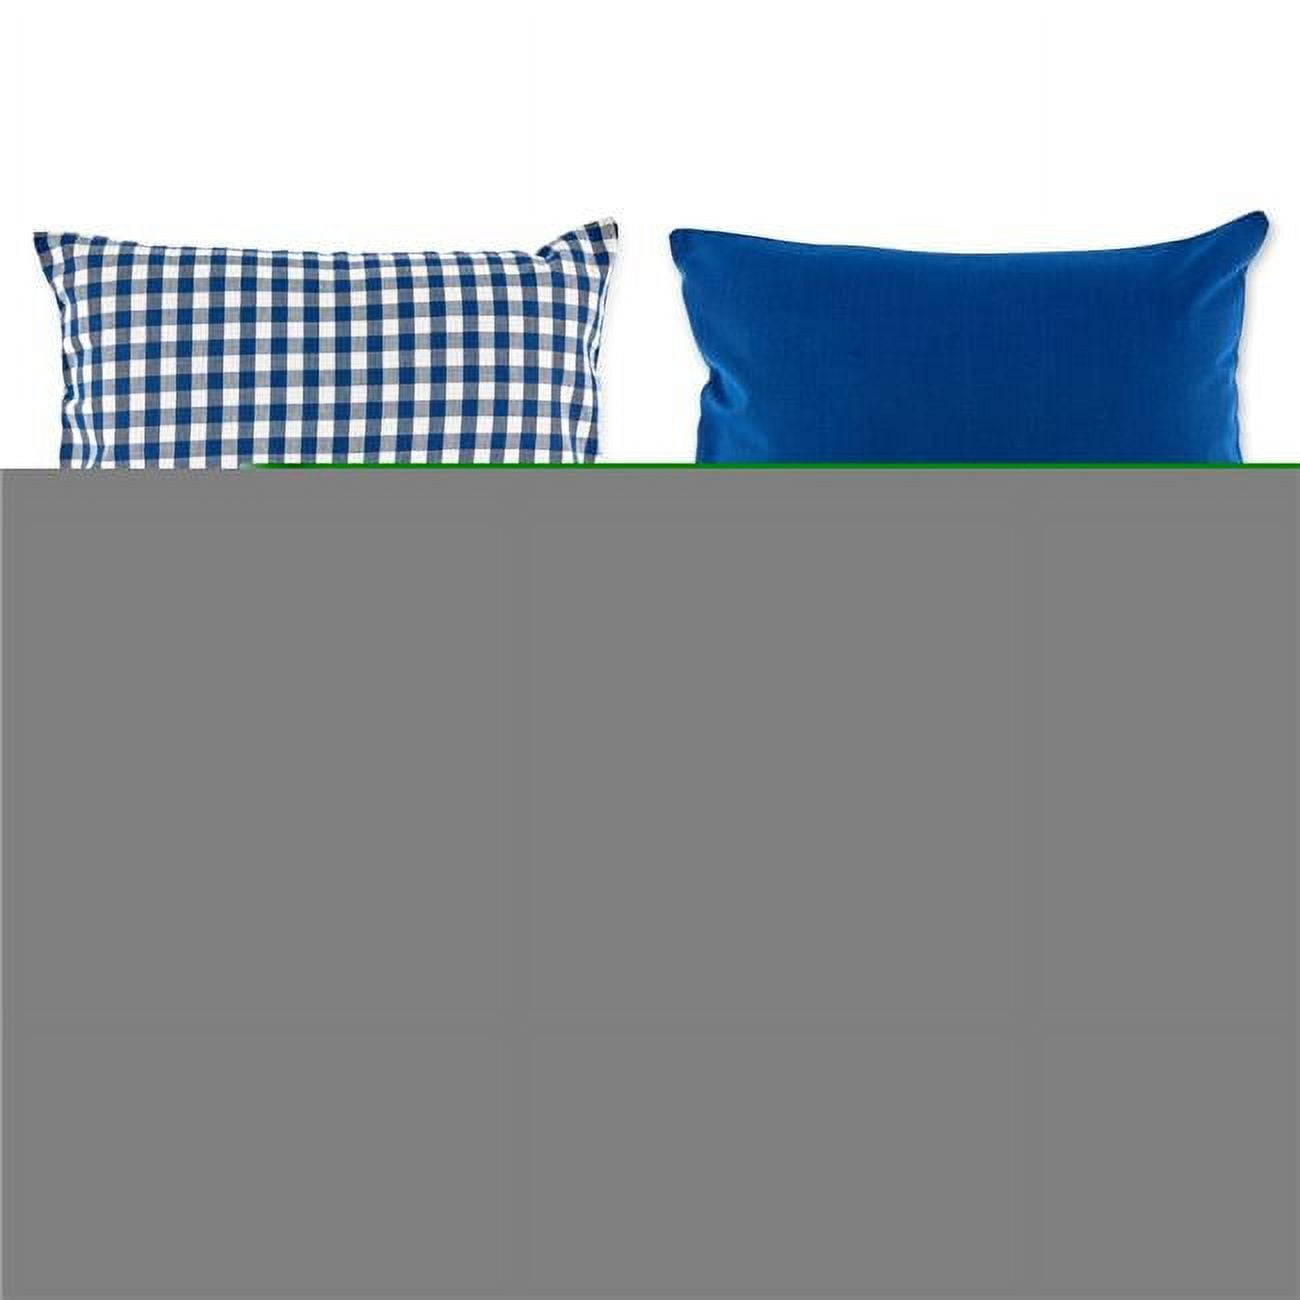 Design Imports Assorted Farmhouse Pillow Covers 18x18 Set of 4